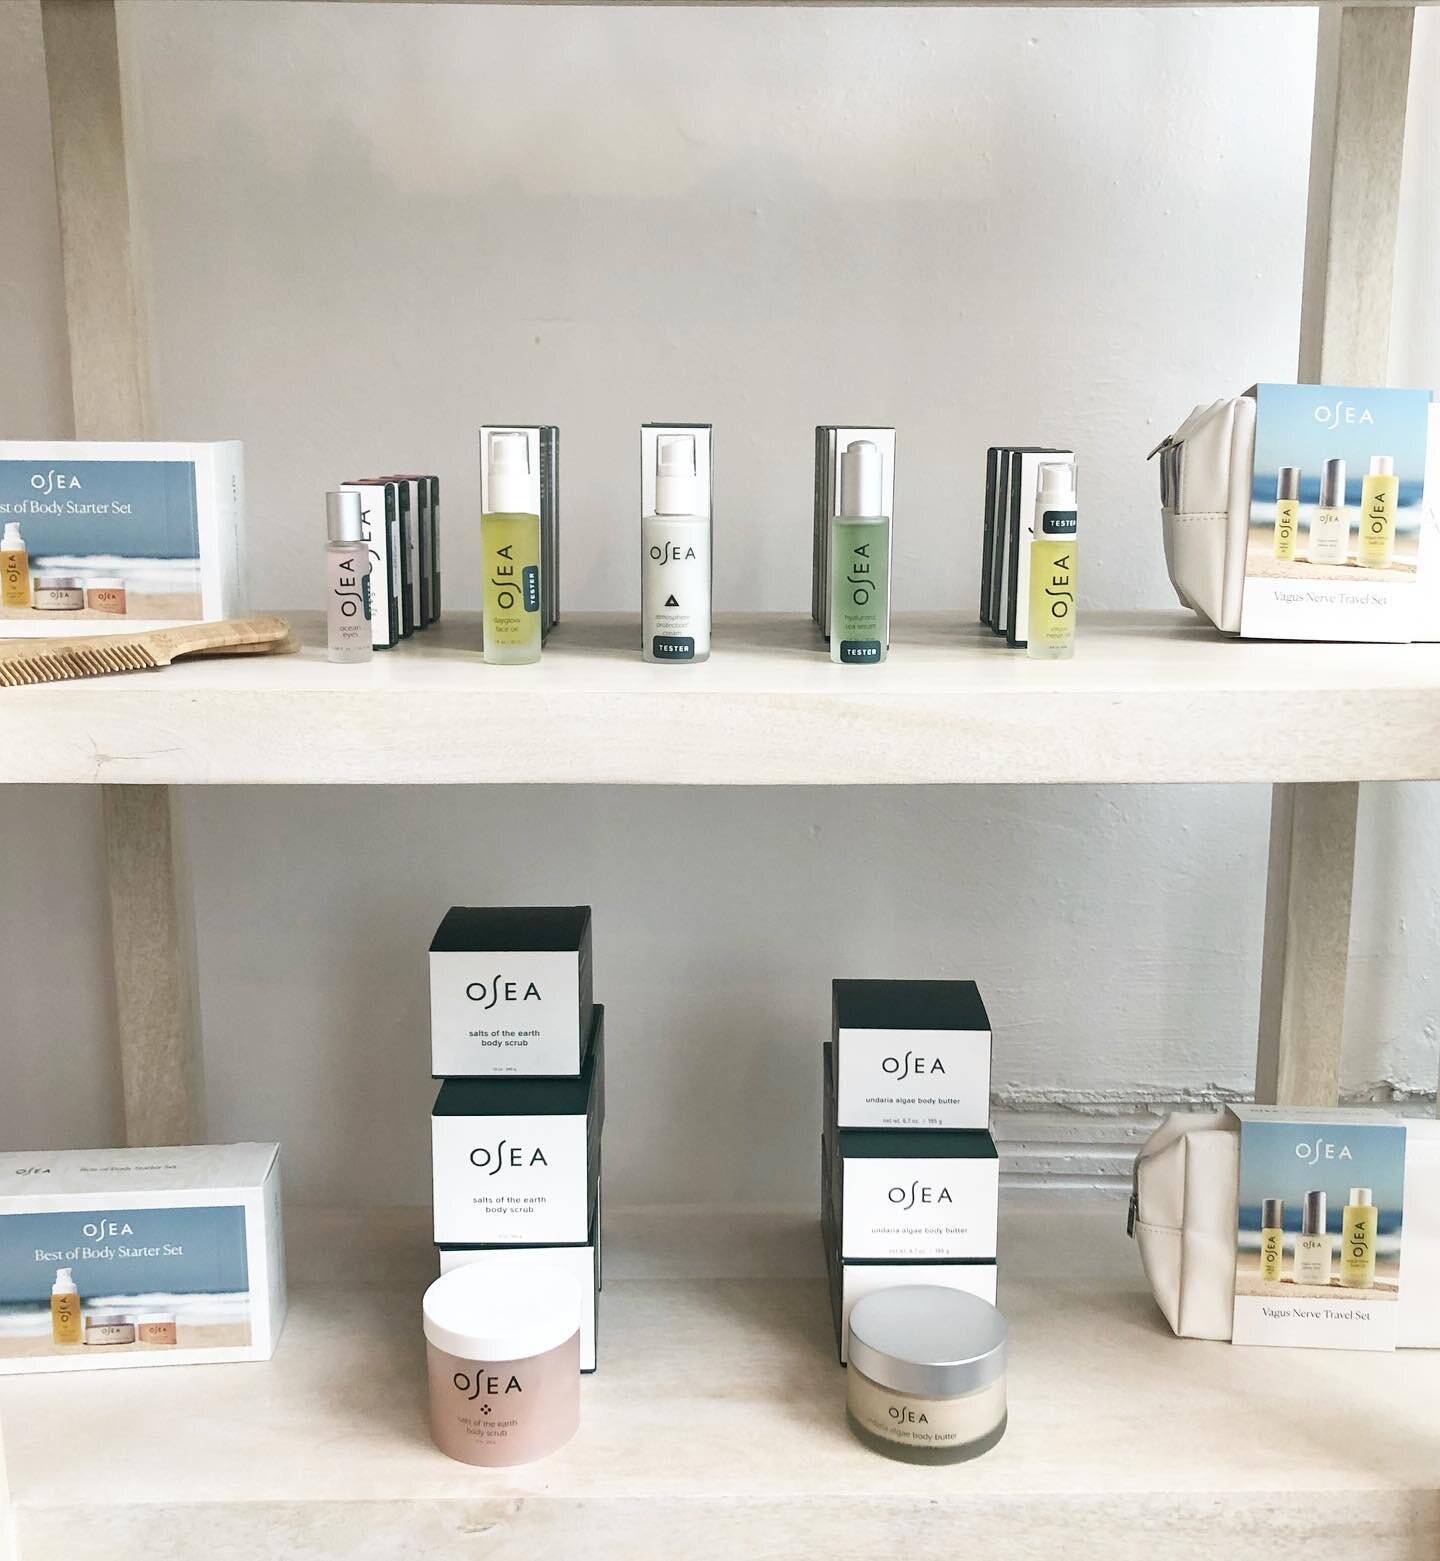 Our first shipment of OSEA is here!!! I&rsquo;ve used their products for years and am so thrilled to be a partner. 

Come try it all!!! We also have beautiful gift sets including the vagus nerve products- the best for the person who has everything! #